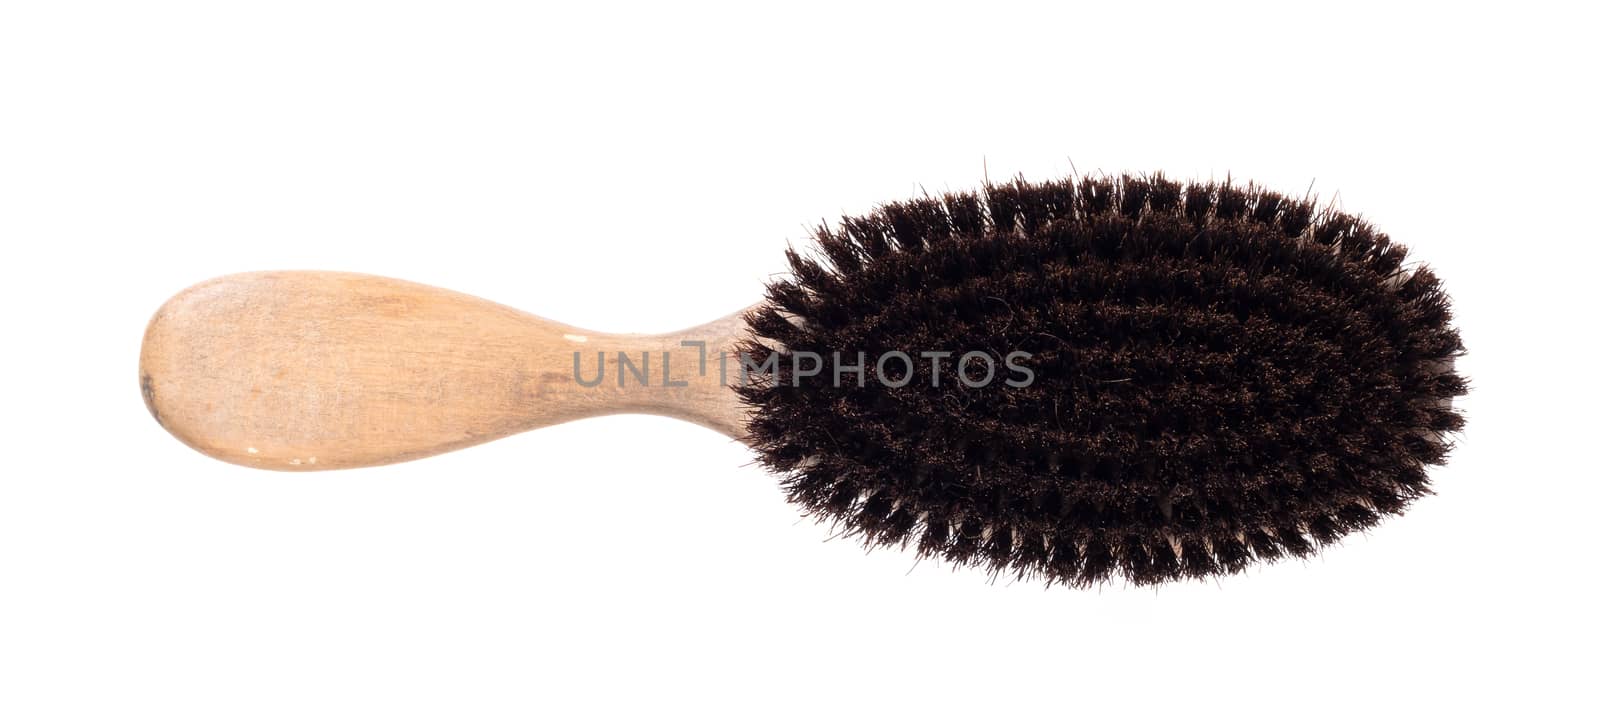 Old hair brush with some hair in it, isolated on white